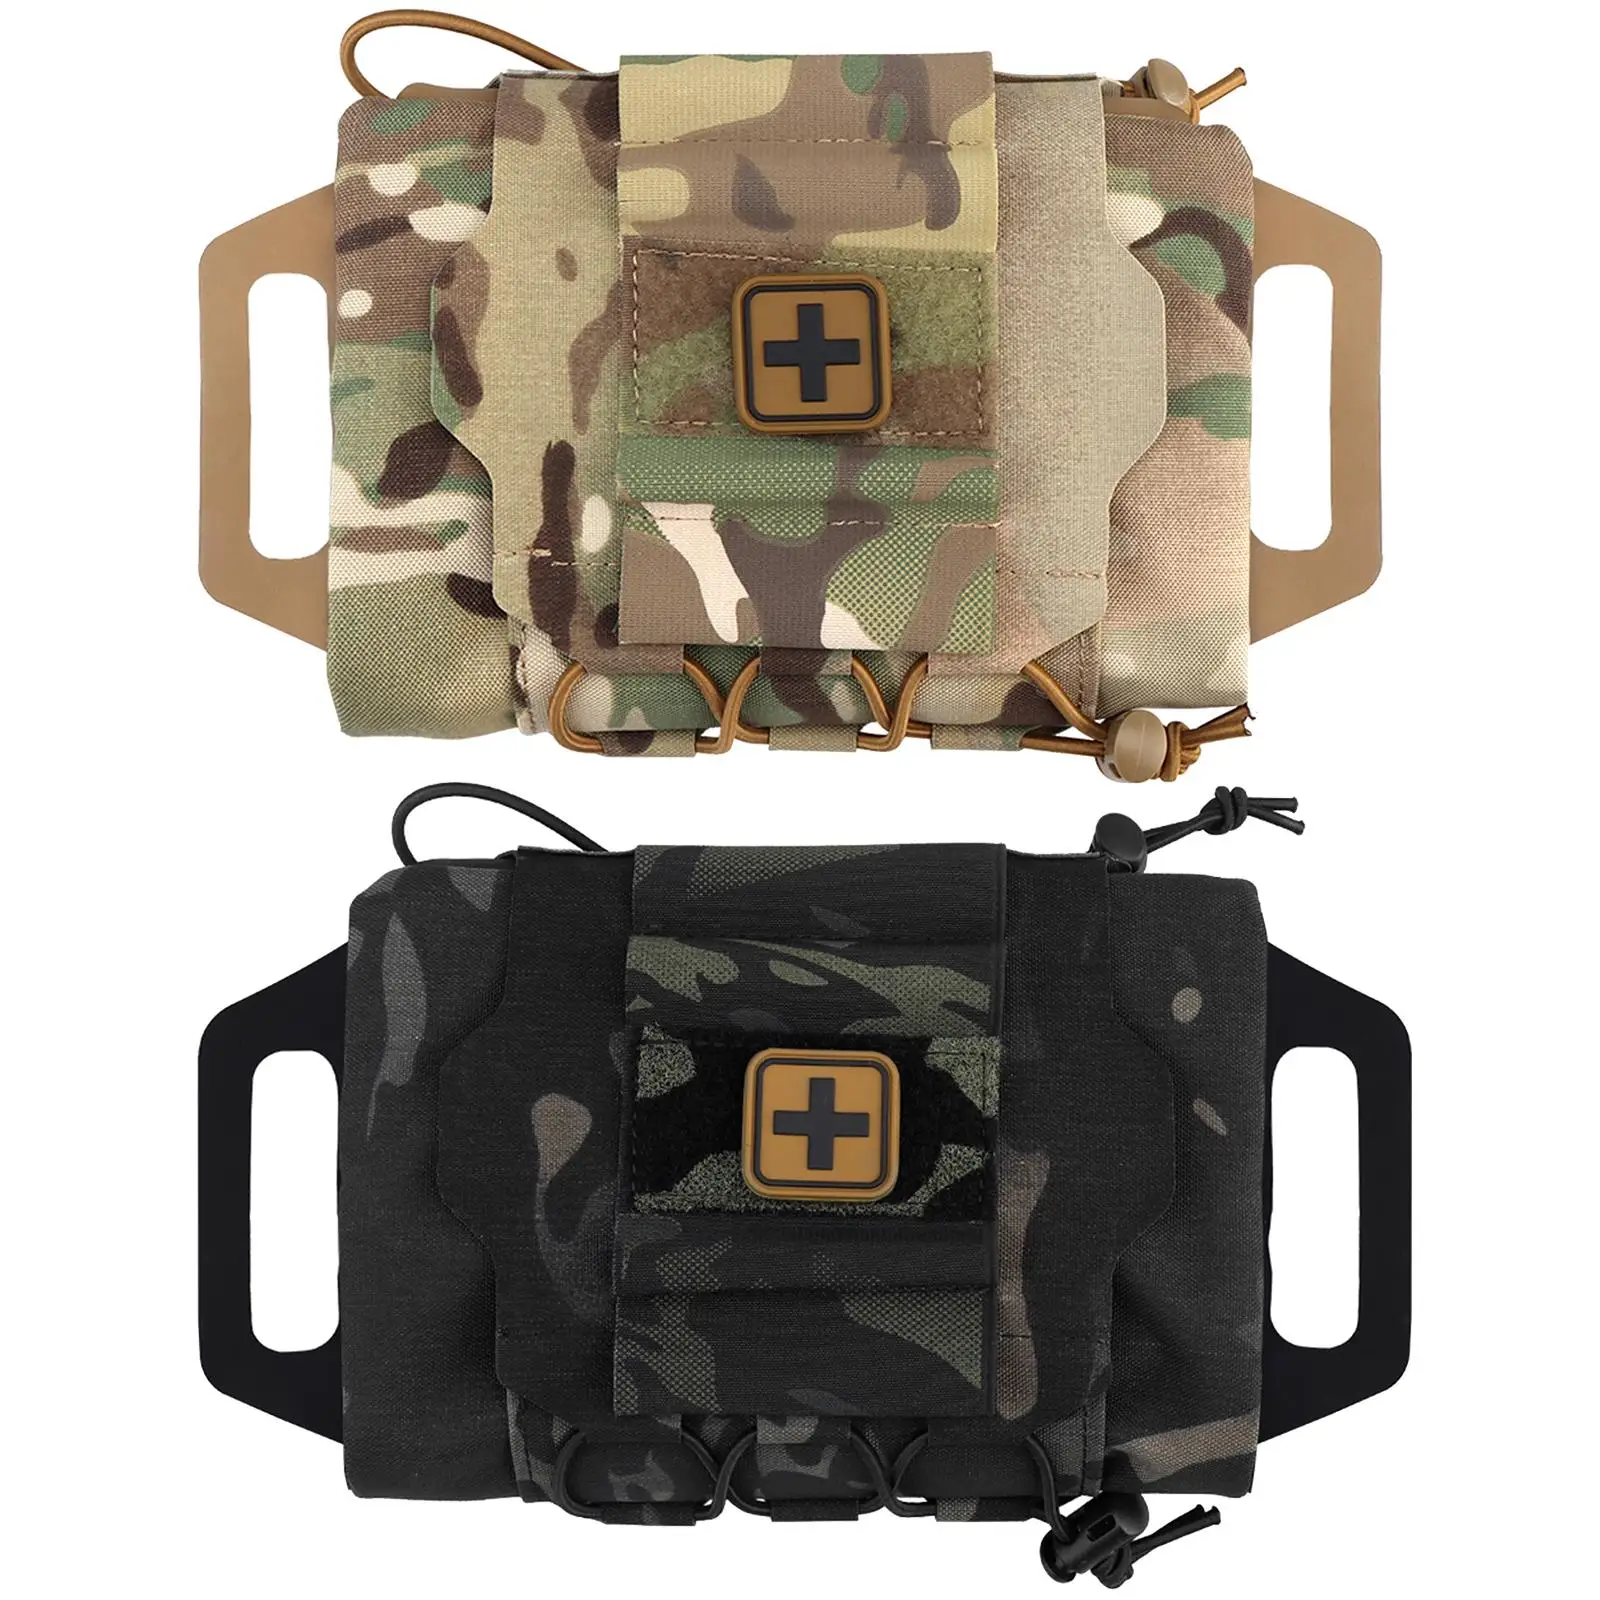 

Compact Utility Pouch Detachable Supplies Gear Accessories First Aid Bag for Survival Car Outdoor Mountaineering Travel